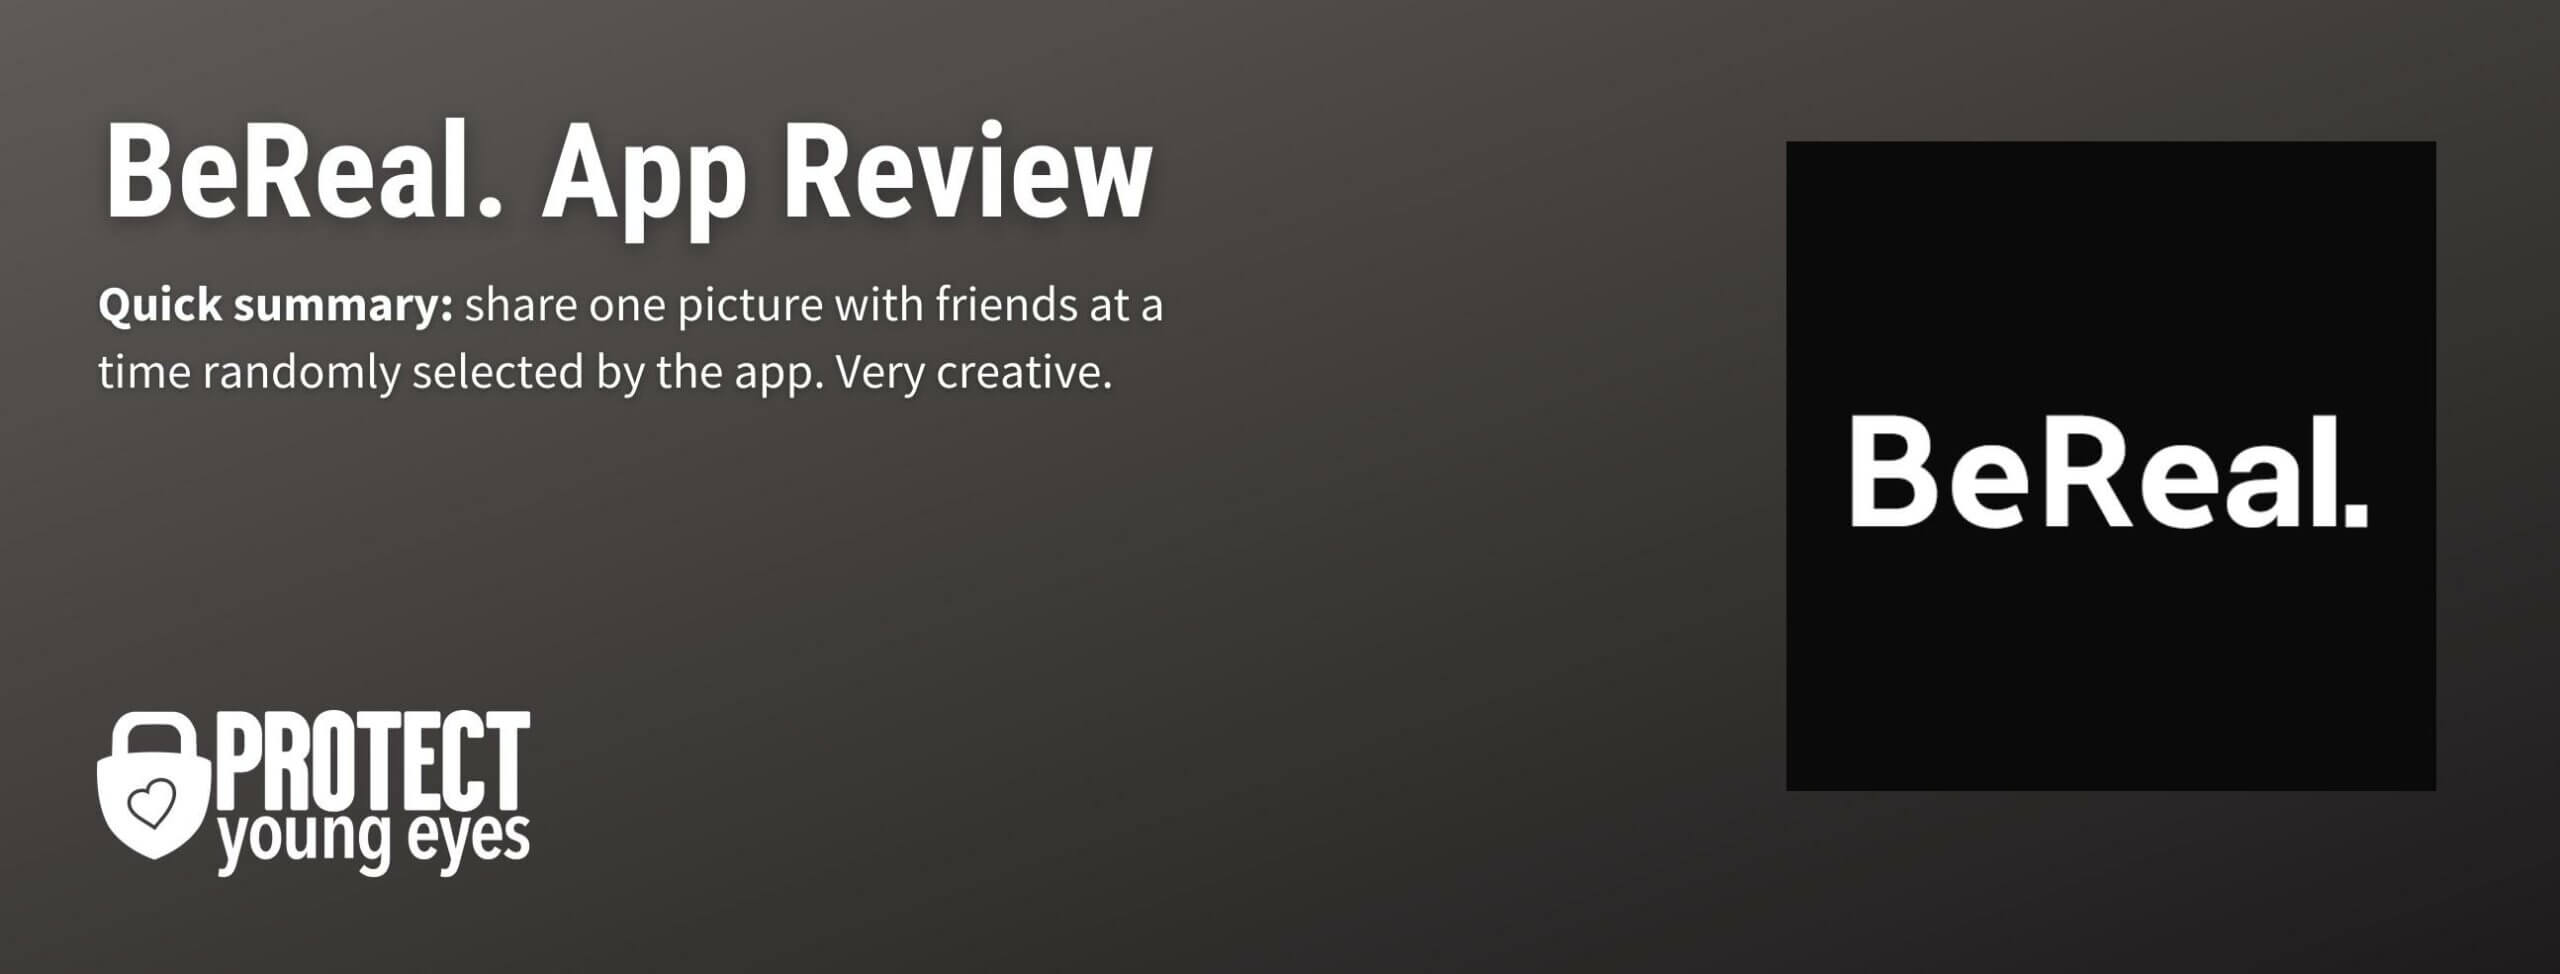 BeReal Header Image for App Review